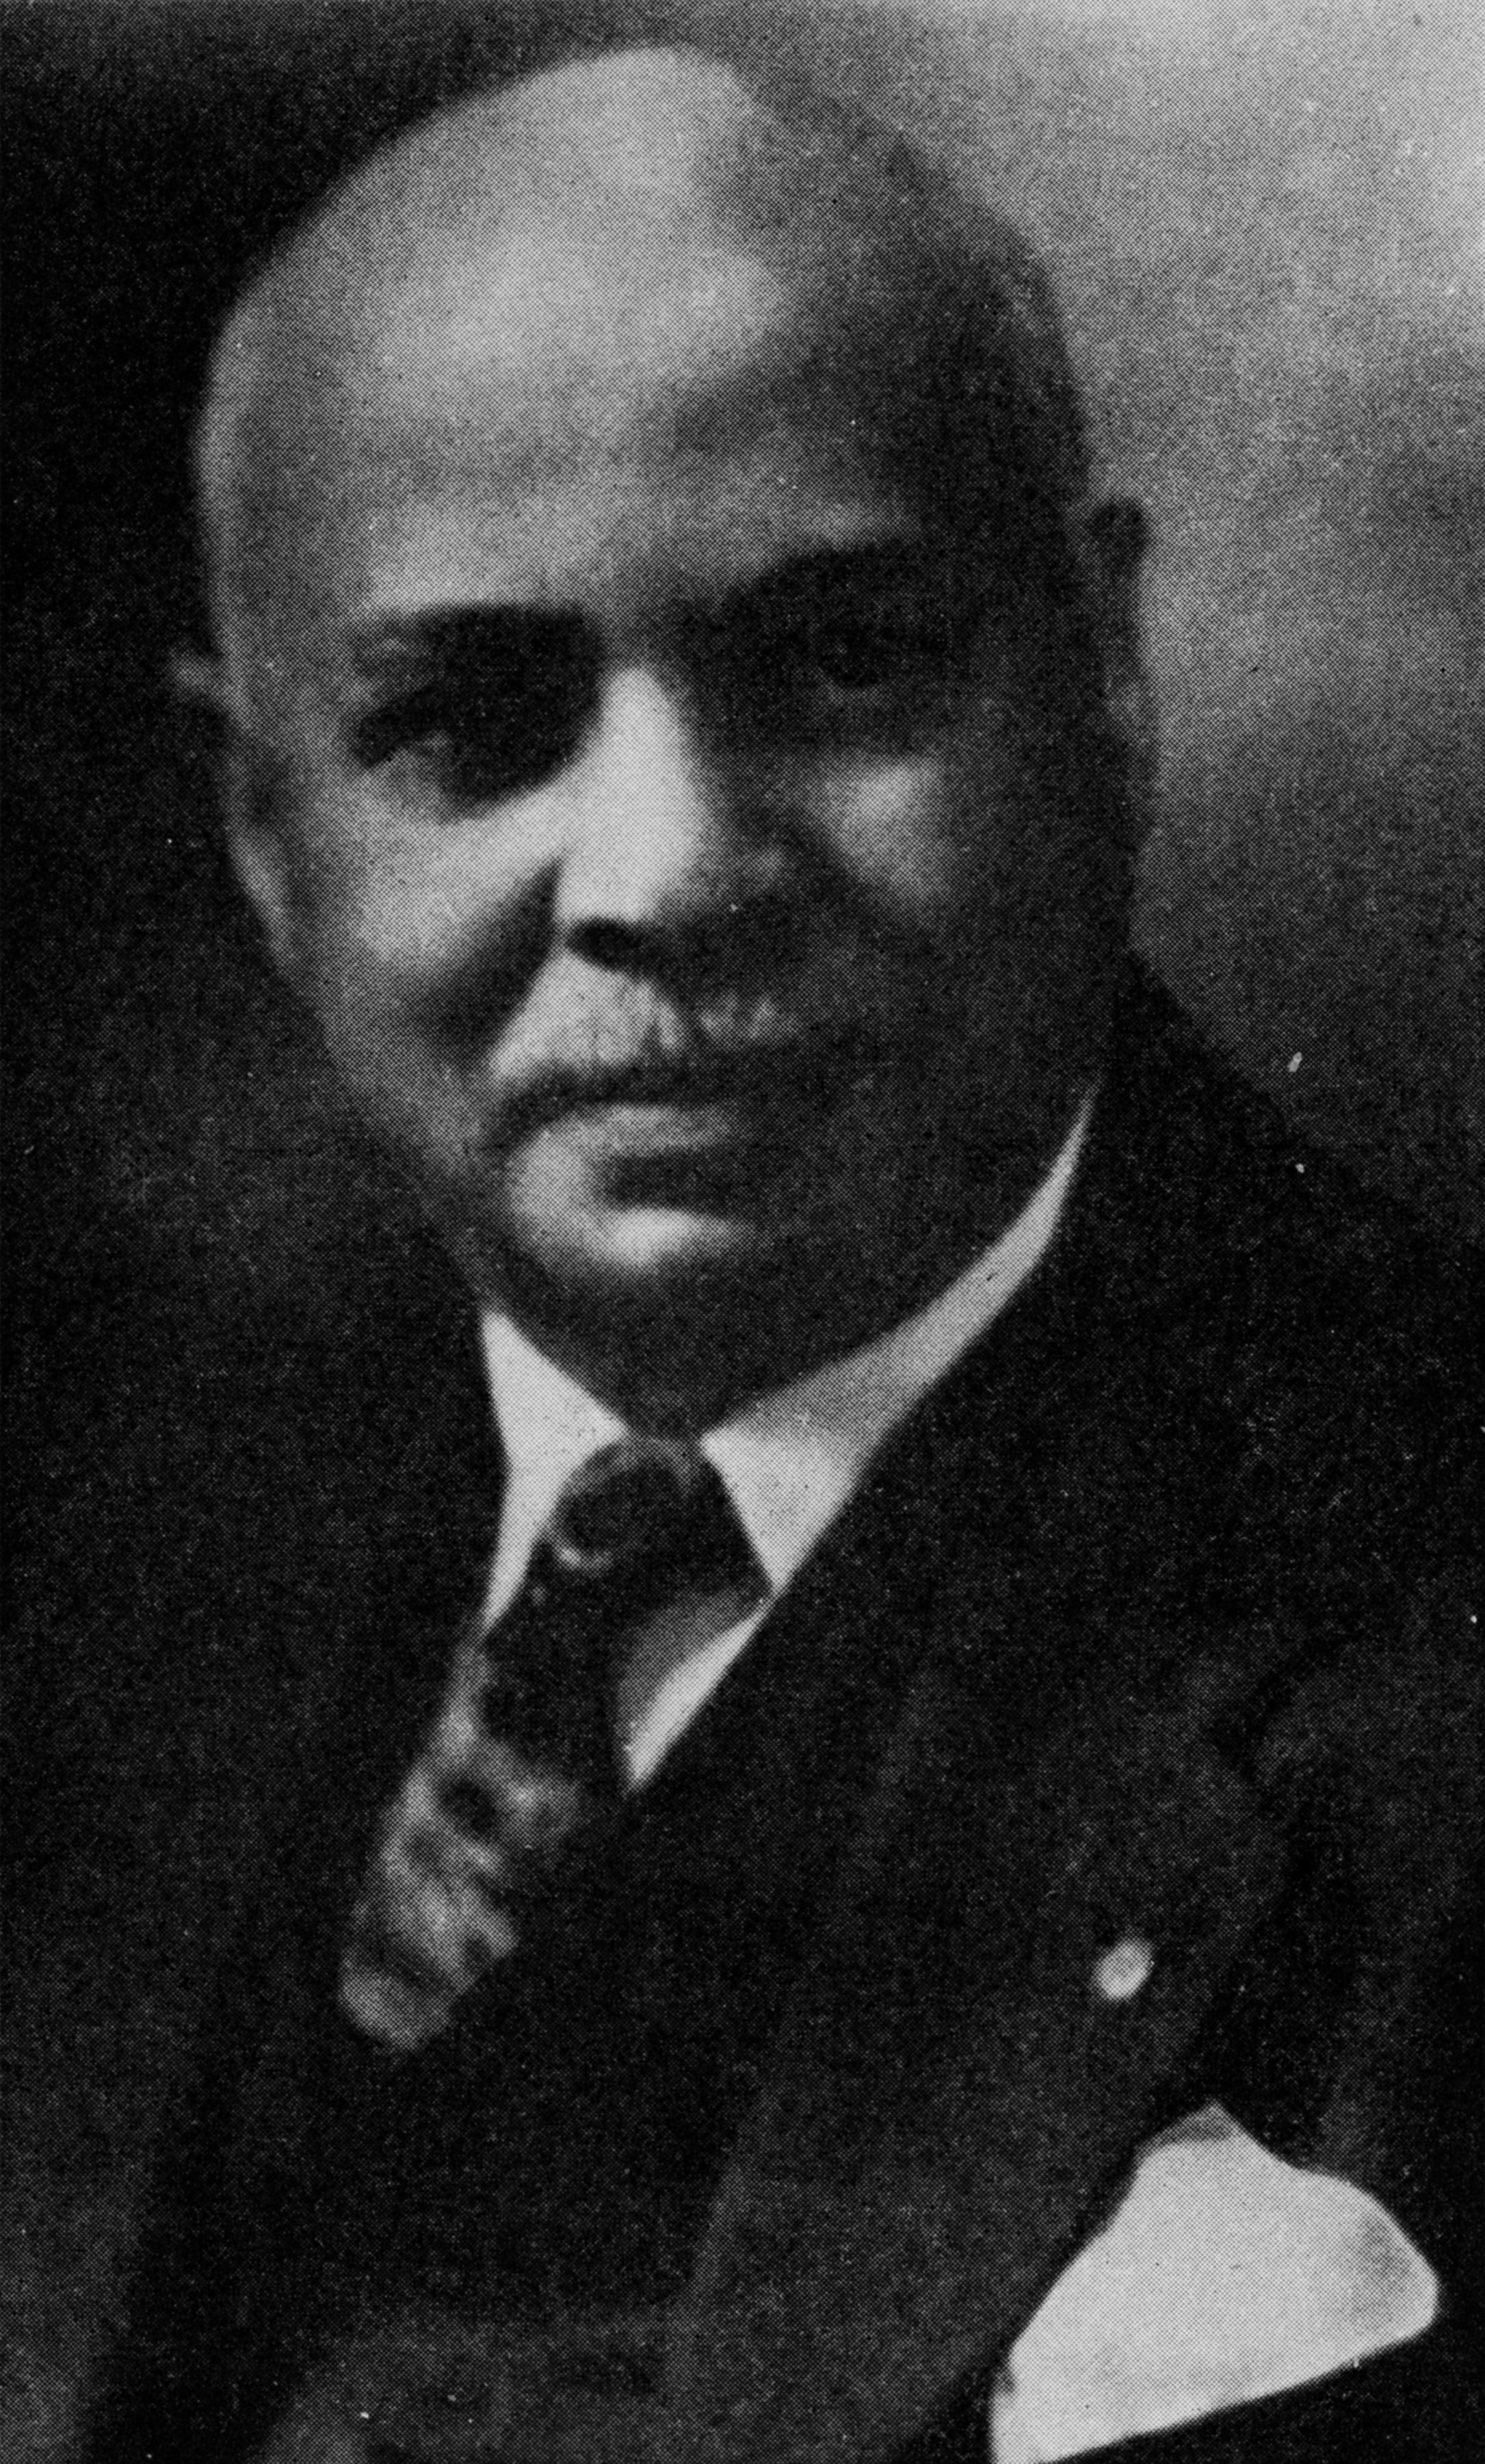 File:W. C. Handy - The St. Louis Blues - First page.jpg - Wikipedia